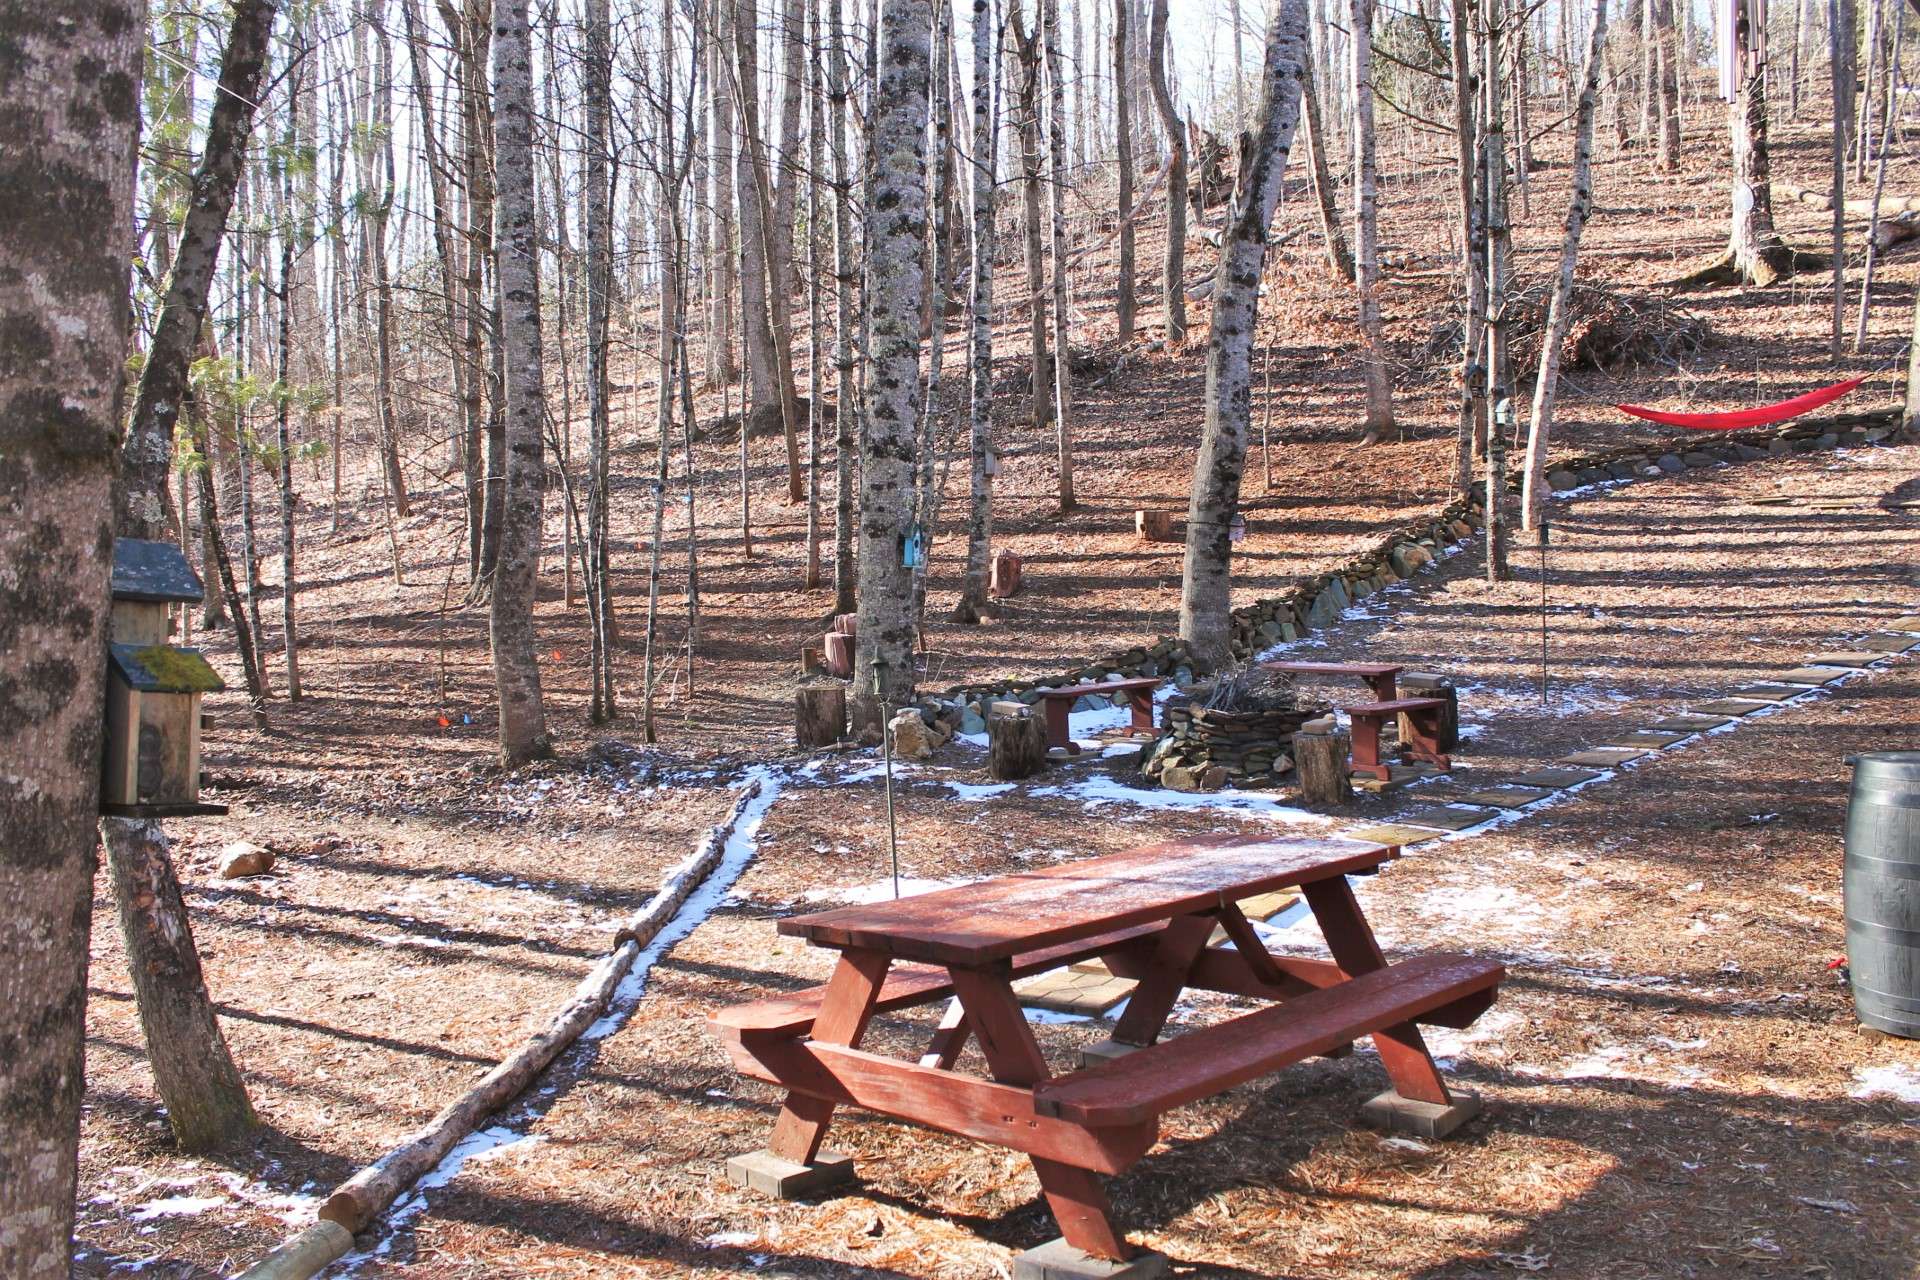 Picnic area and a firepit for toasting s'mores and making mountain memories.  Call for more information or an appointment to see listing D182.